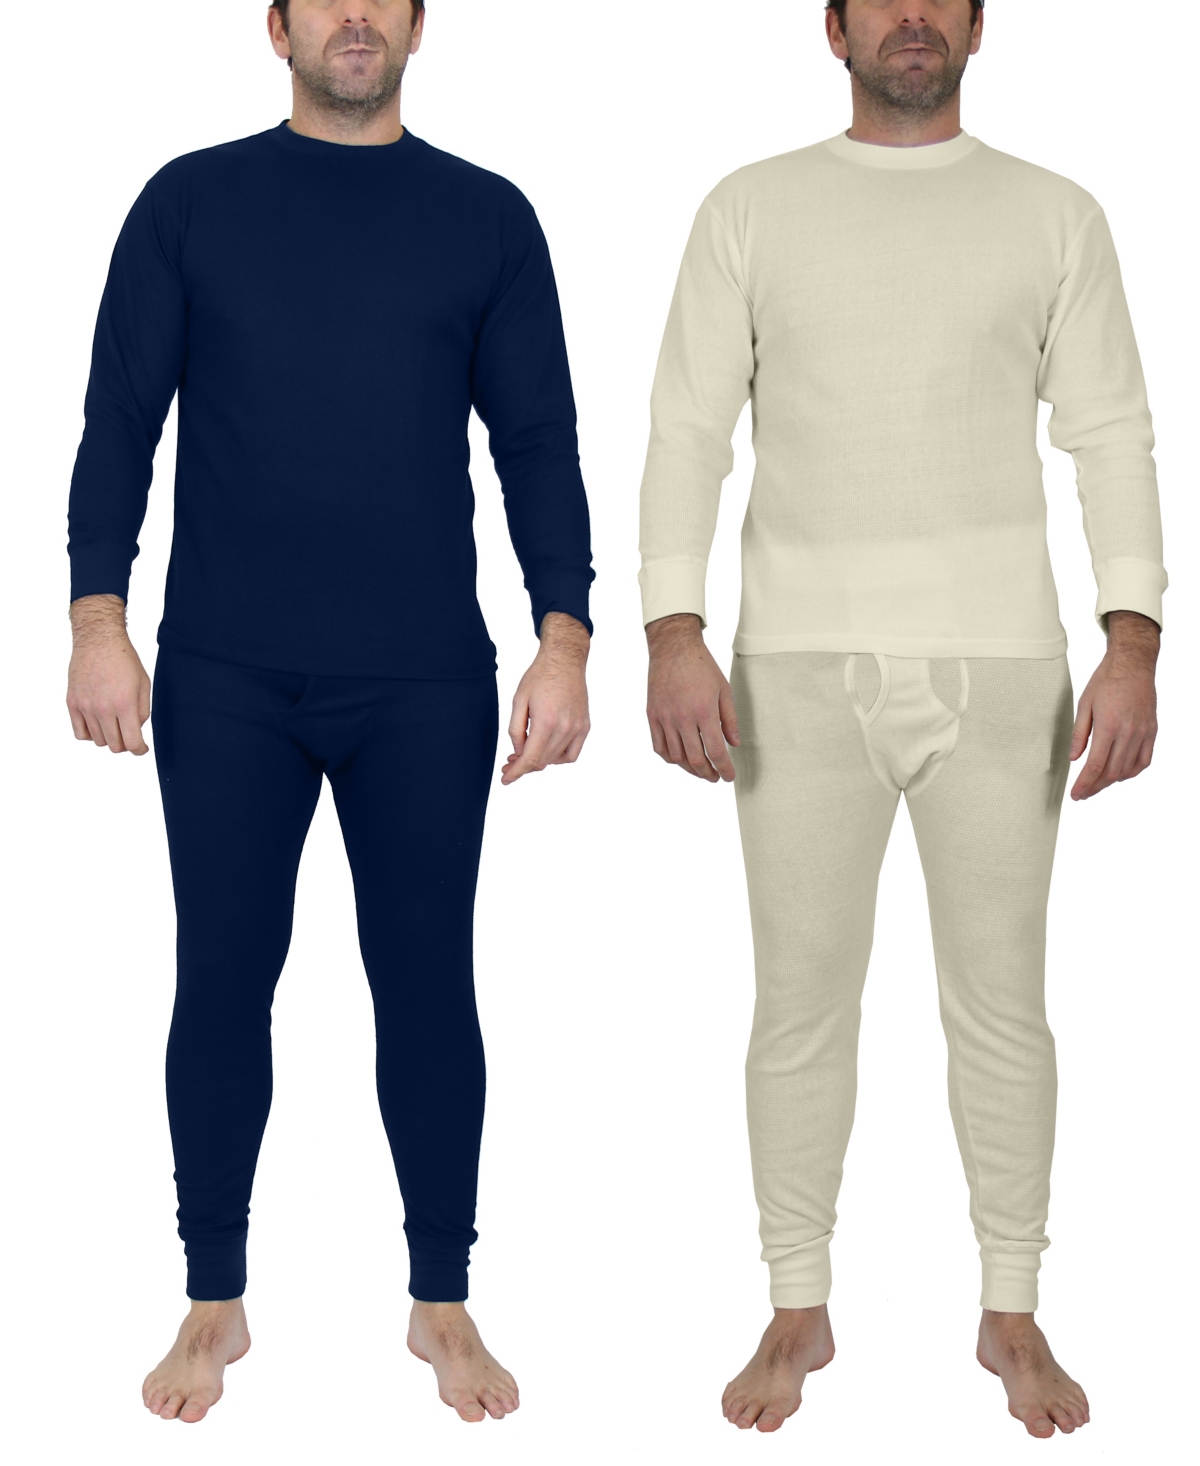 Galaxy By Harvic Men's Winter Thermal Top and Bottom, 2 Piece Set ...